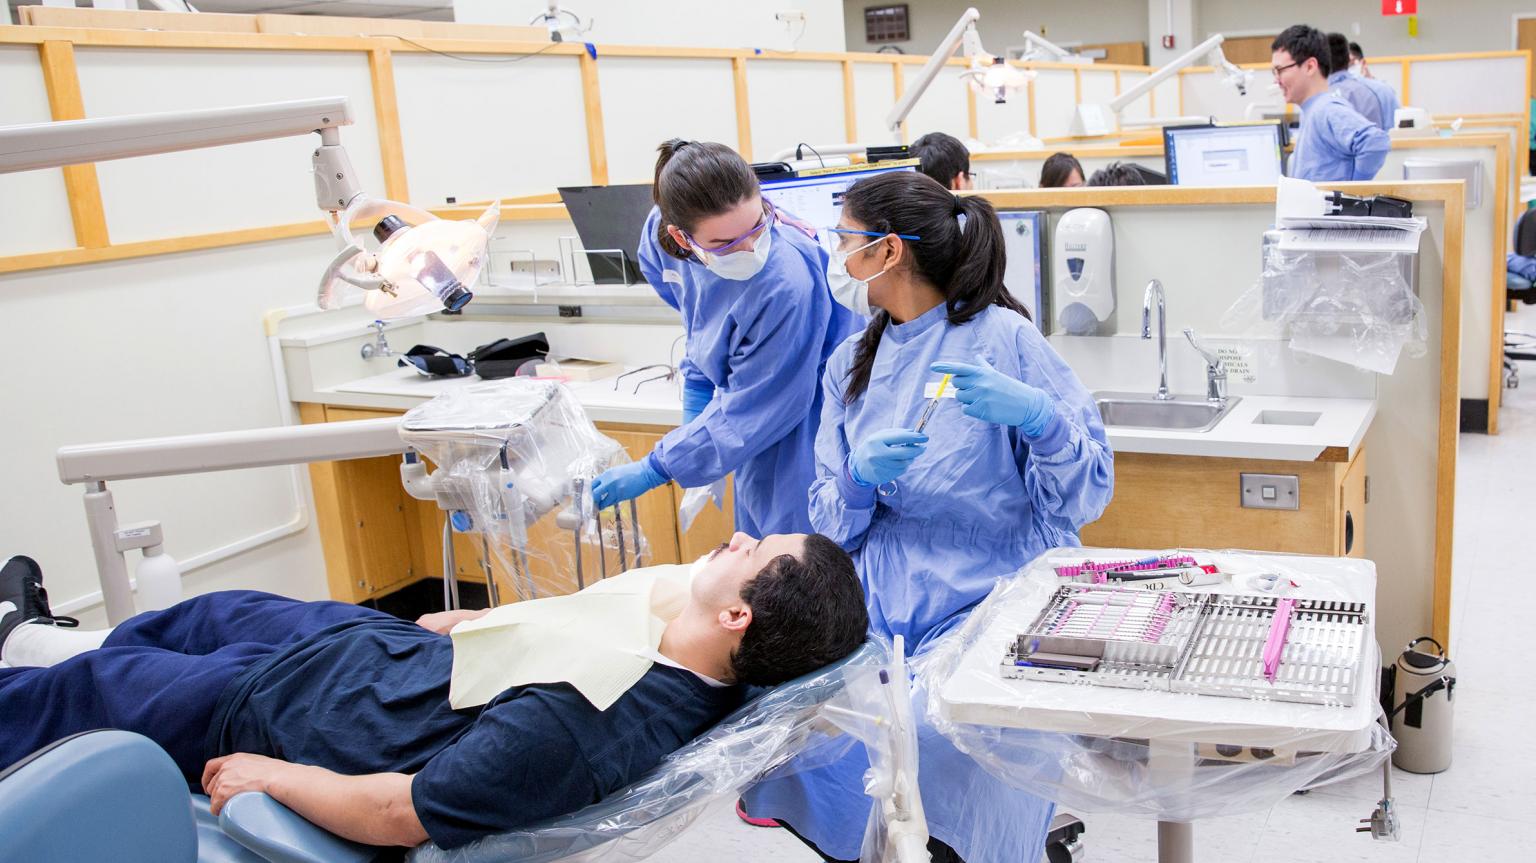 Best Dental Hygiene Schools In North Carolina| Cost, Requirement & How To Apply